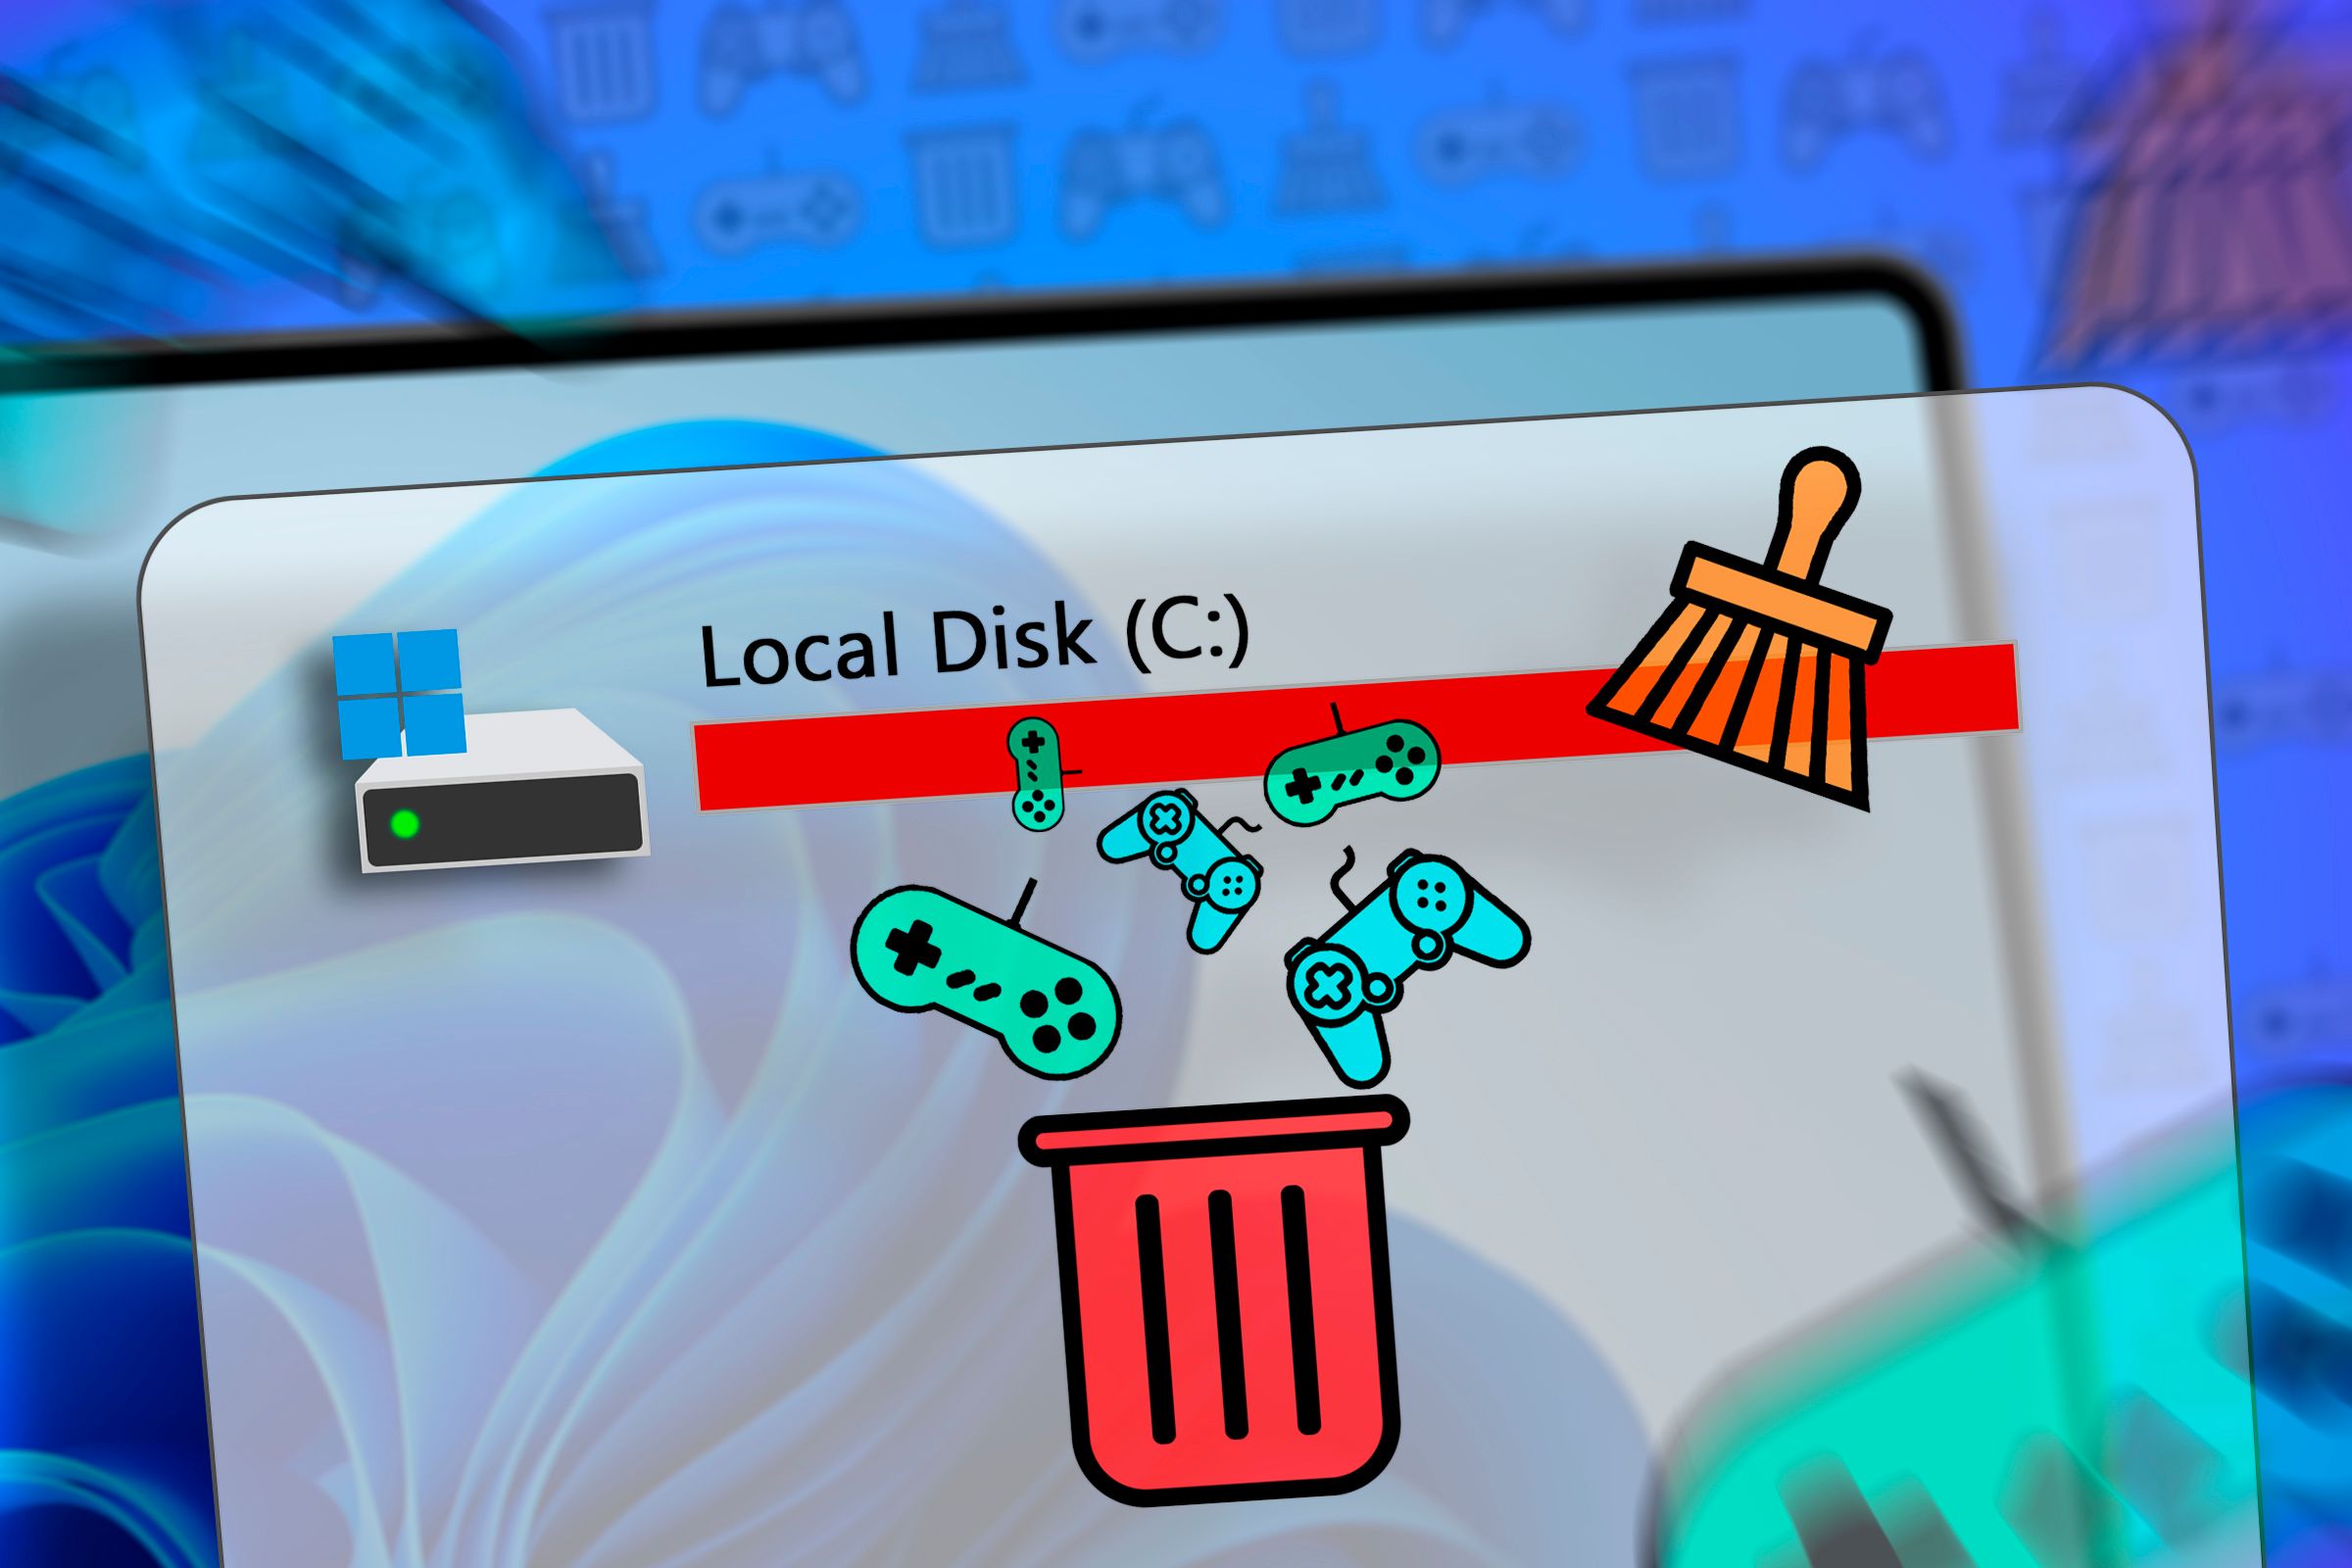 A Windows screen with an image of the local disk full and some video game icons going into a trash can.